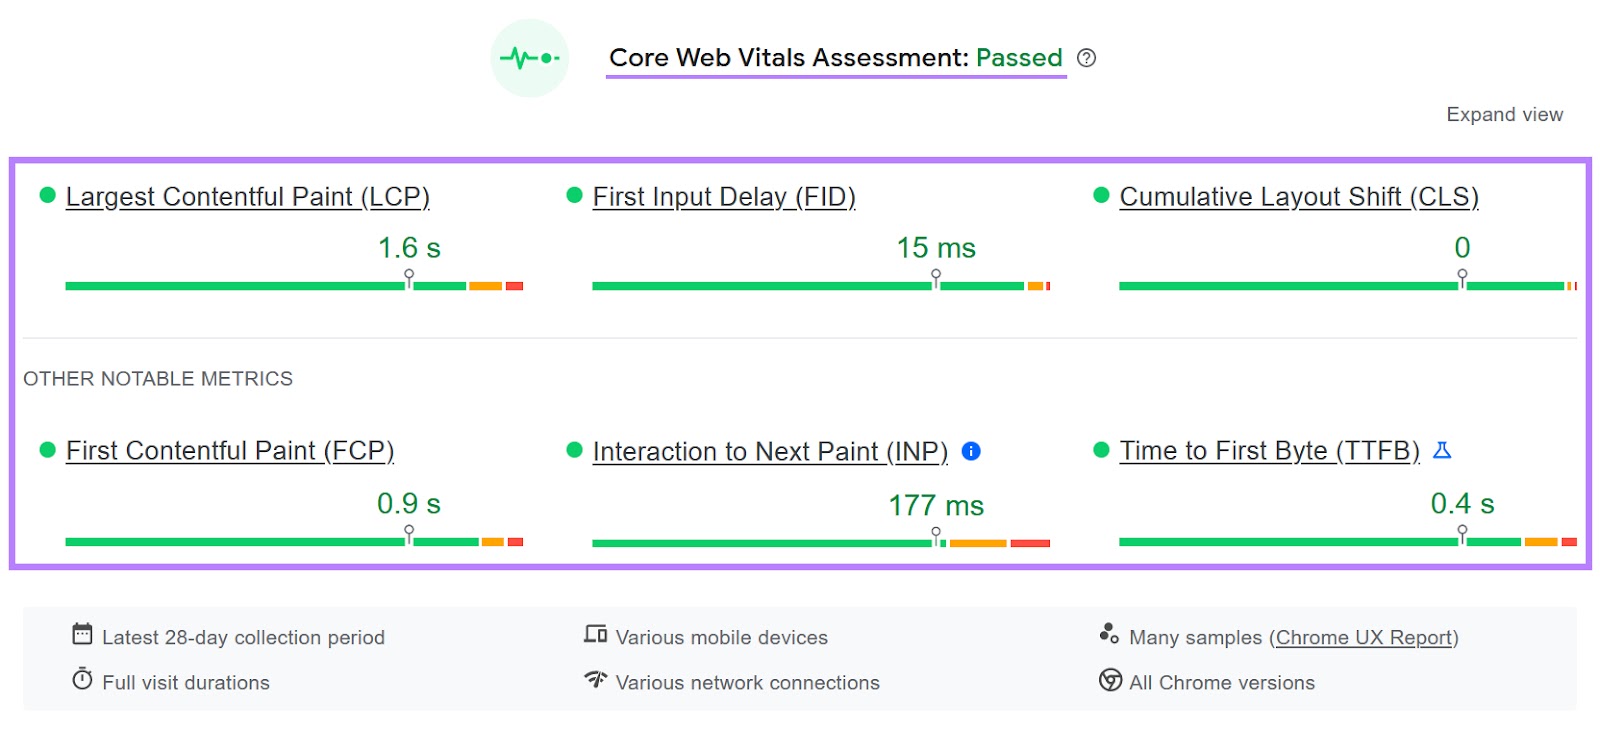 “Core Web Vitals Assessment” in PageSpeed Insights